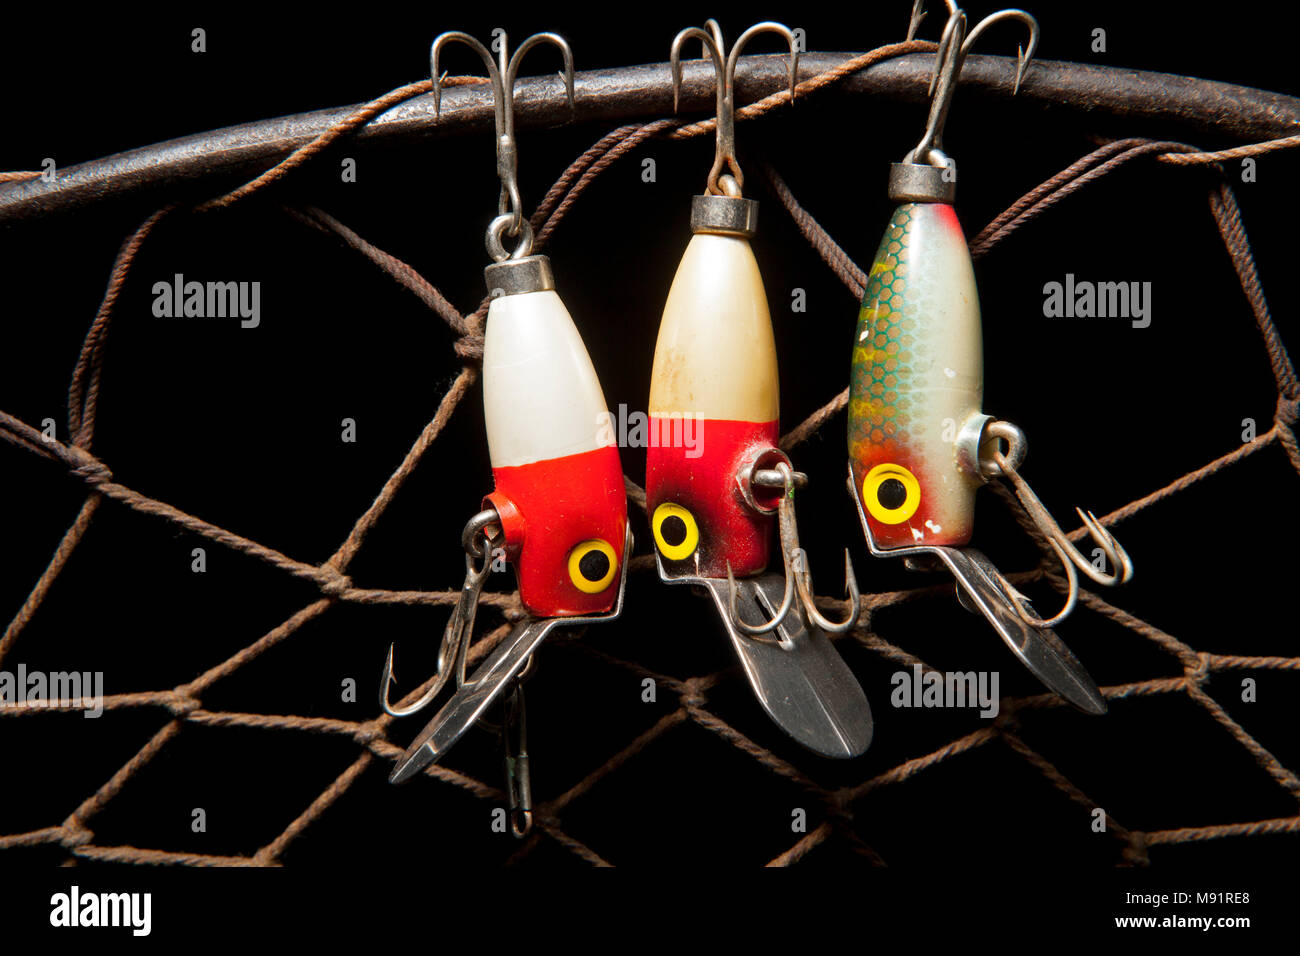 Old fishing lures or plugs, possibly by Woods MFG, on an old landing net and black background. From a vintage fishing tackle collection in the UK Stock Photo